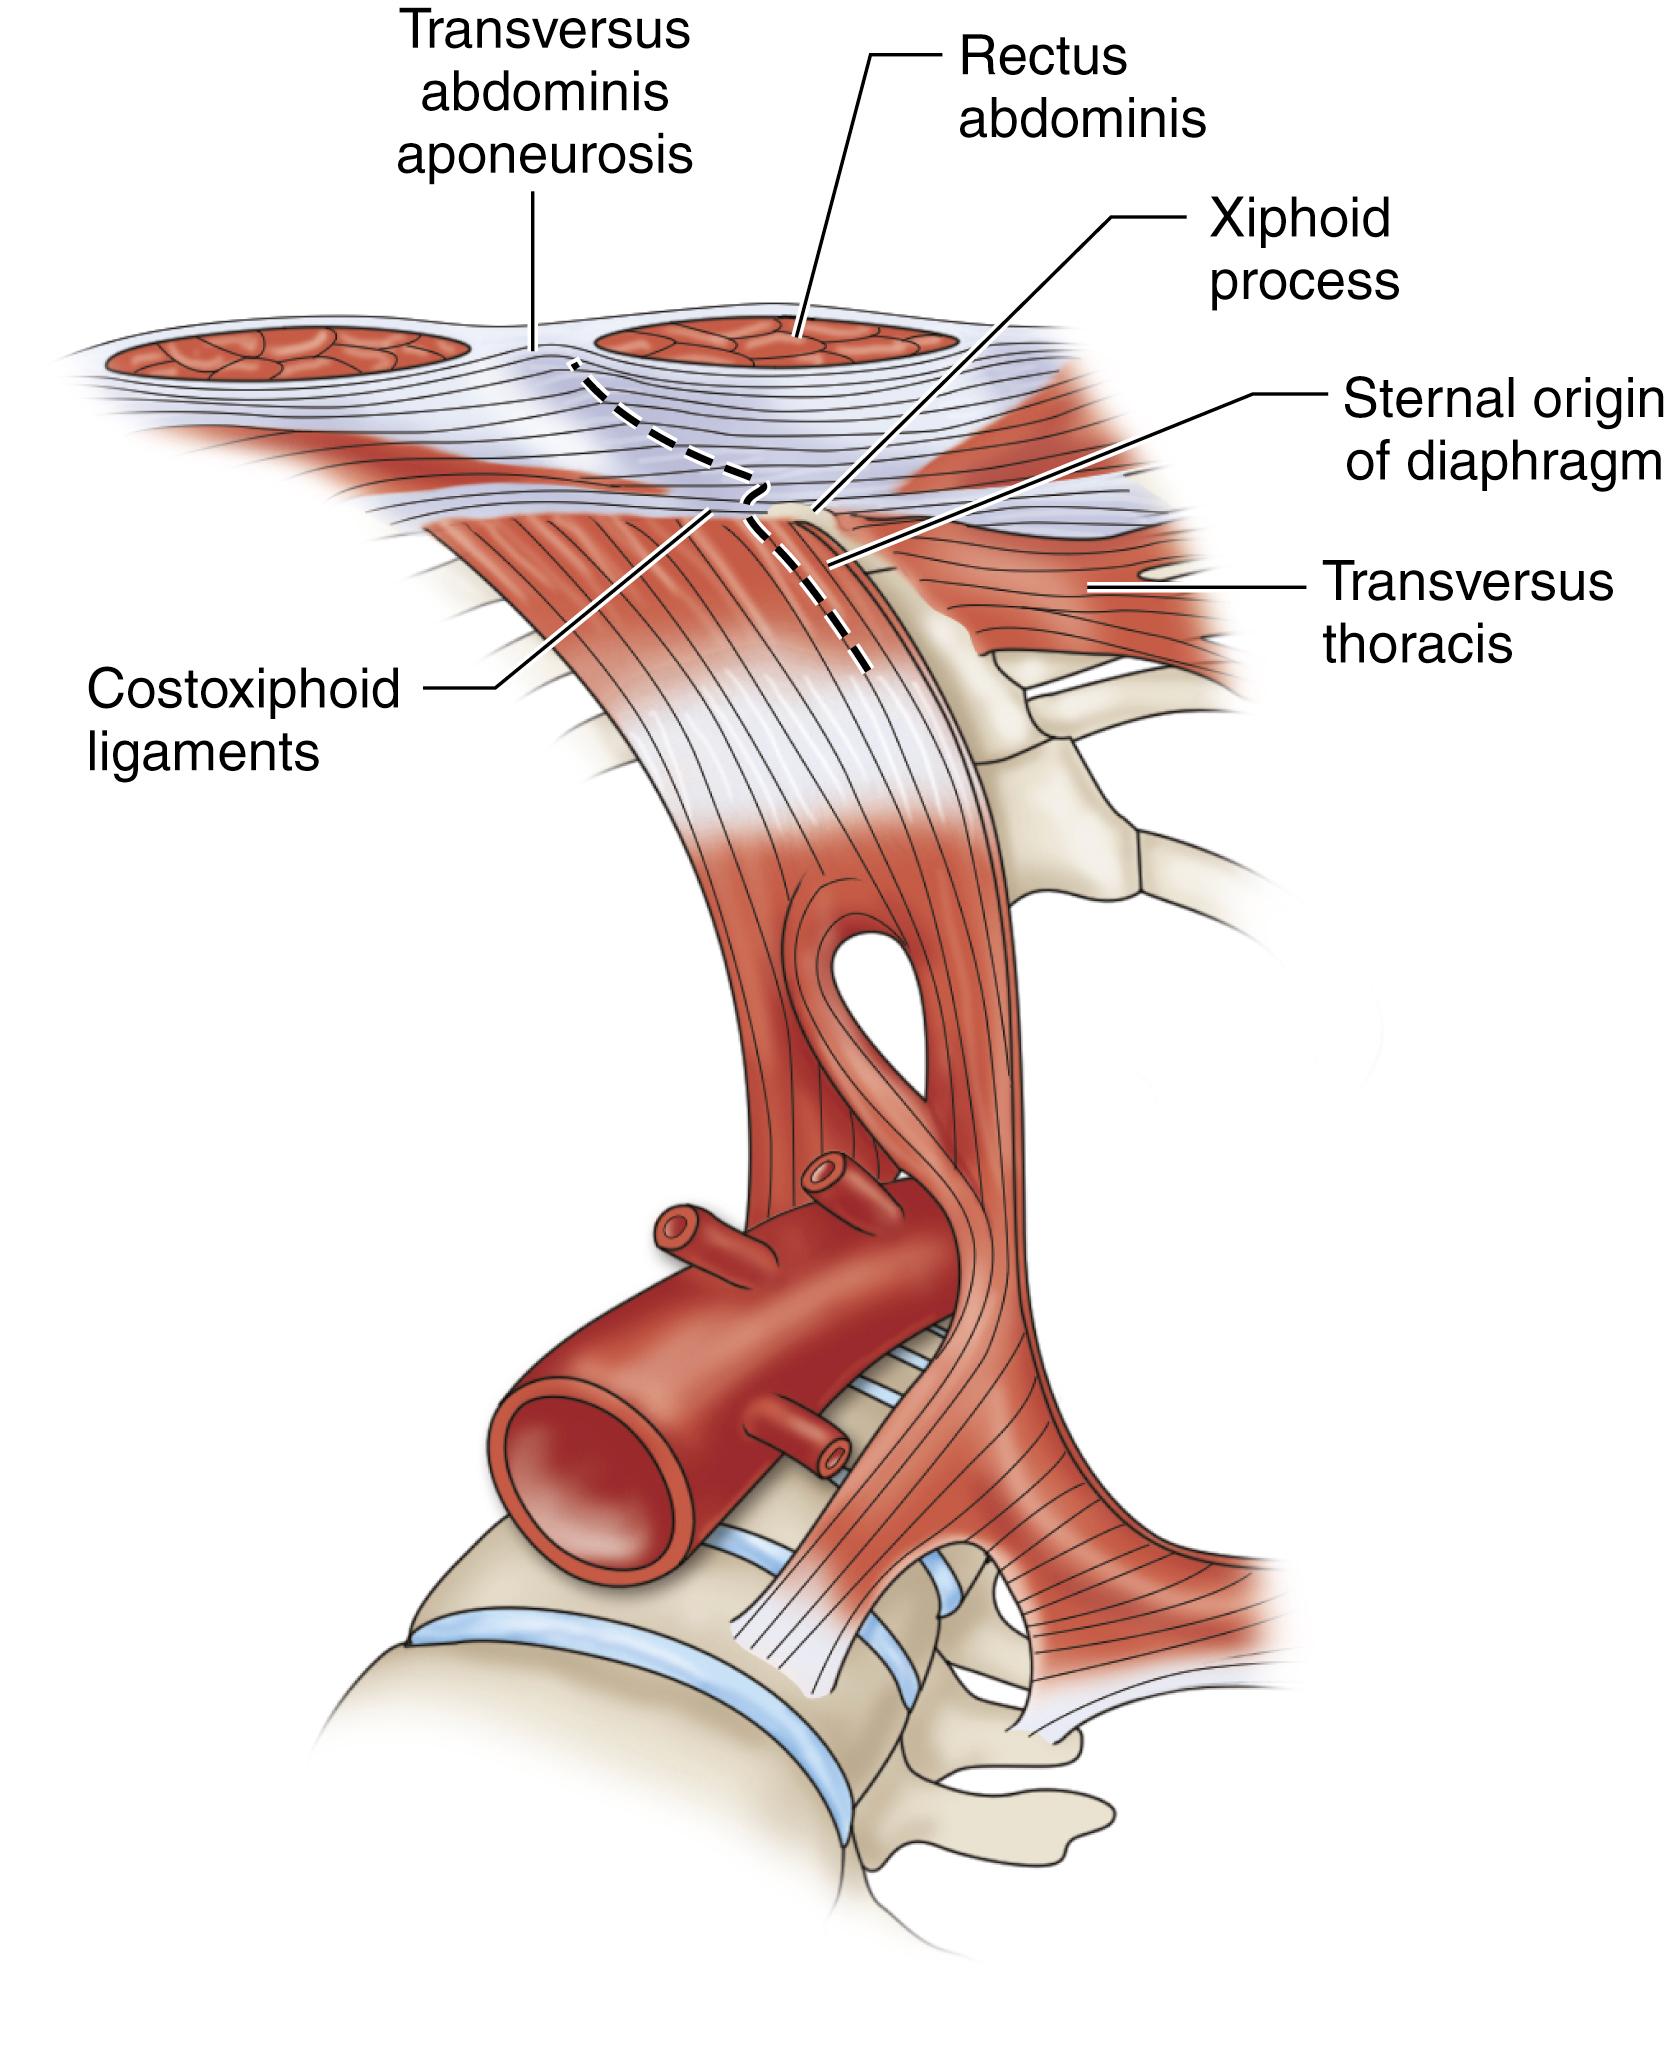 Figure 73.2, The linchpin of upper aortic exposure. When using a midline incision, it is imperative to extend cephalad along the xiphoid process. This maneuver allows transection of the transverse thoracis, anterior diaphragmatic fibers, ventral and dorsal costoxiphoid ligaments, rectus abdominis, and aponeuroses of abdominal muscles. Attention to this detail of the upper incision allows much better cranial exposure facilitating exposure of the paravisceral aorta as well as easier and wider retraction.